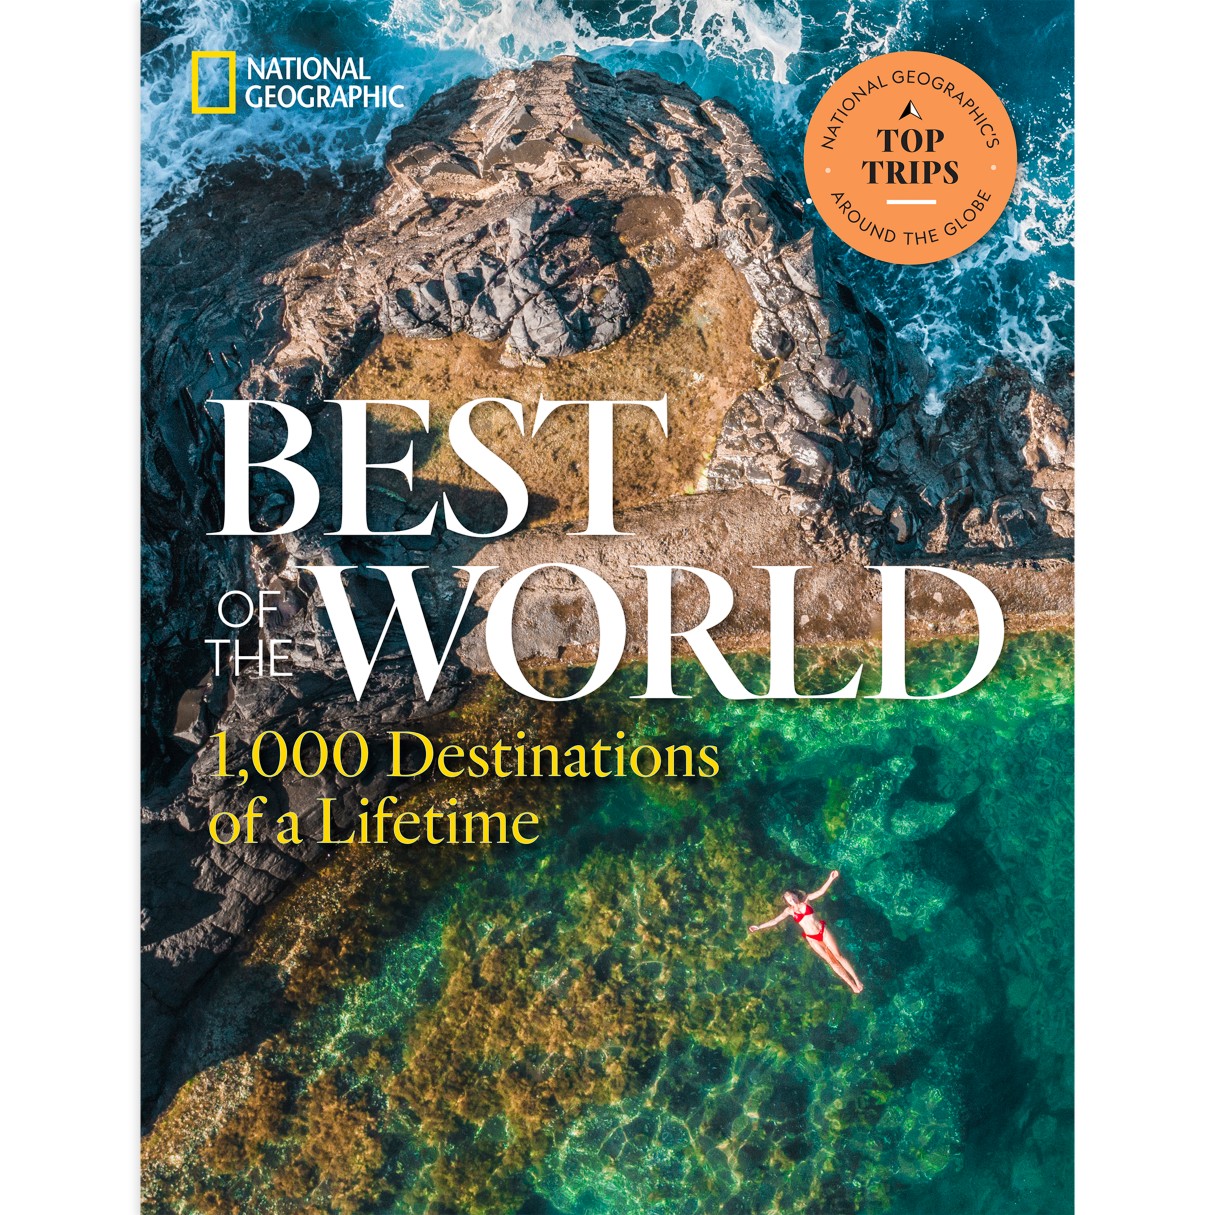 Best of the World: 1,000 Destinations of a Lifetime Book – National Geographic